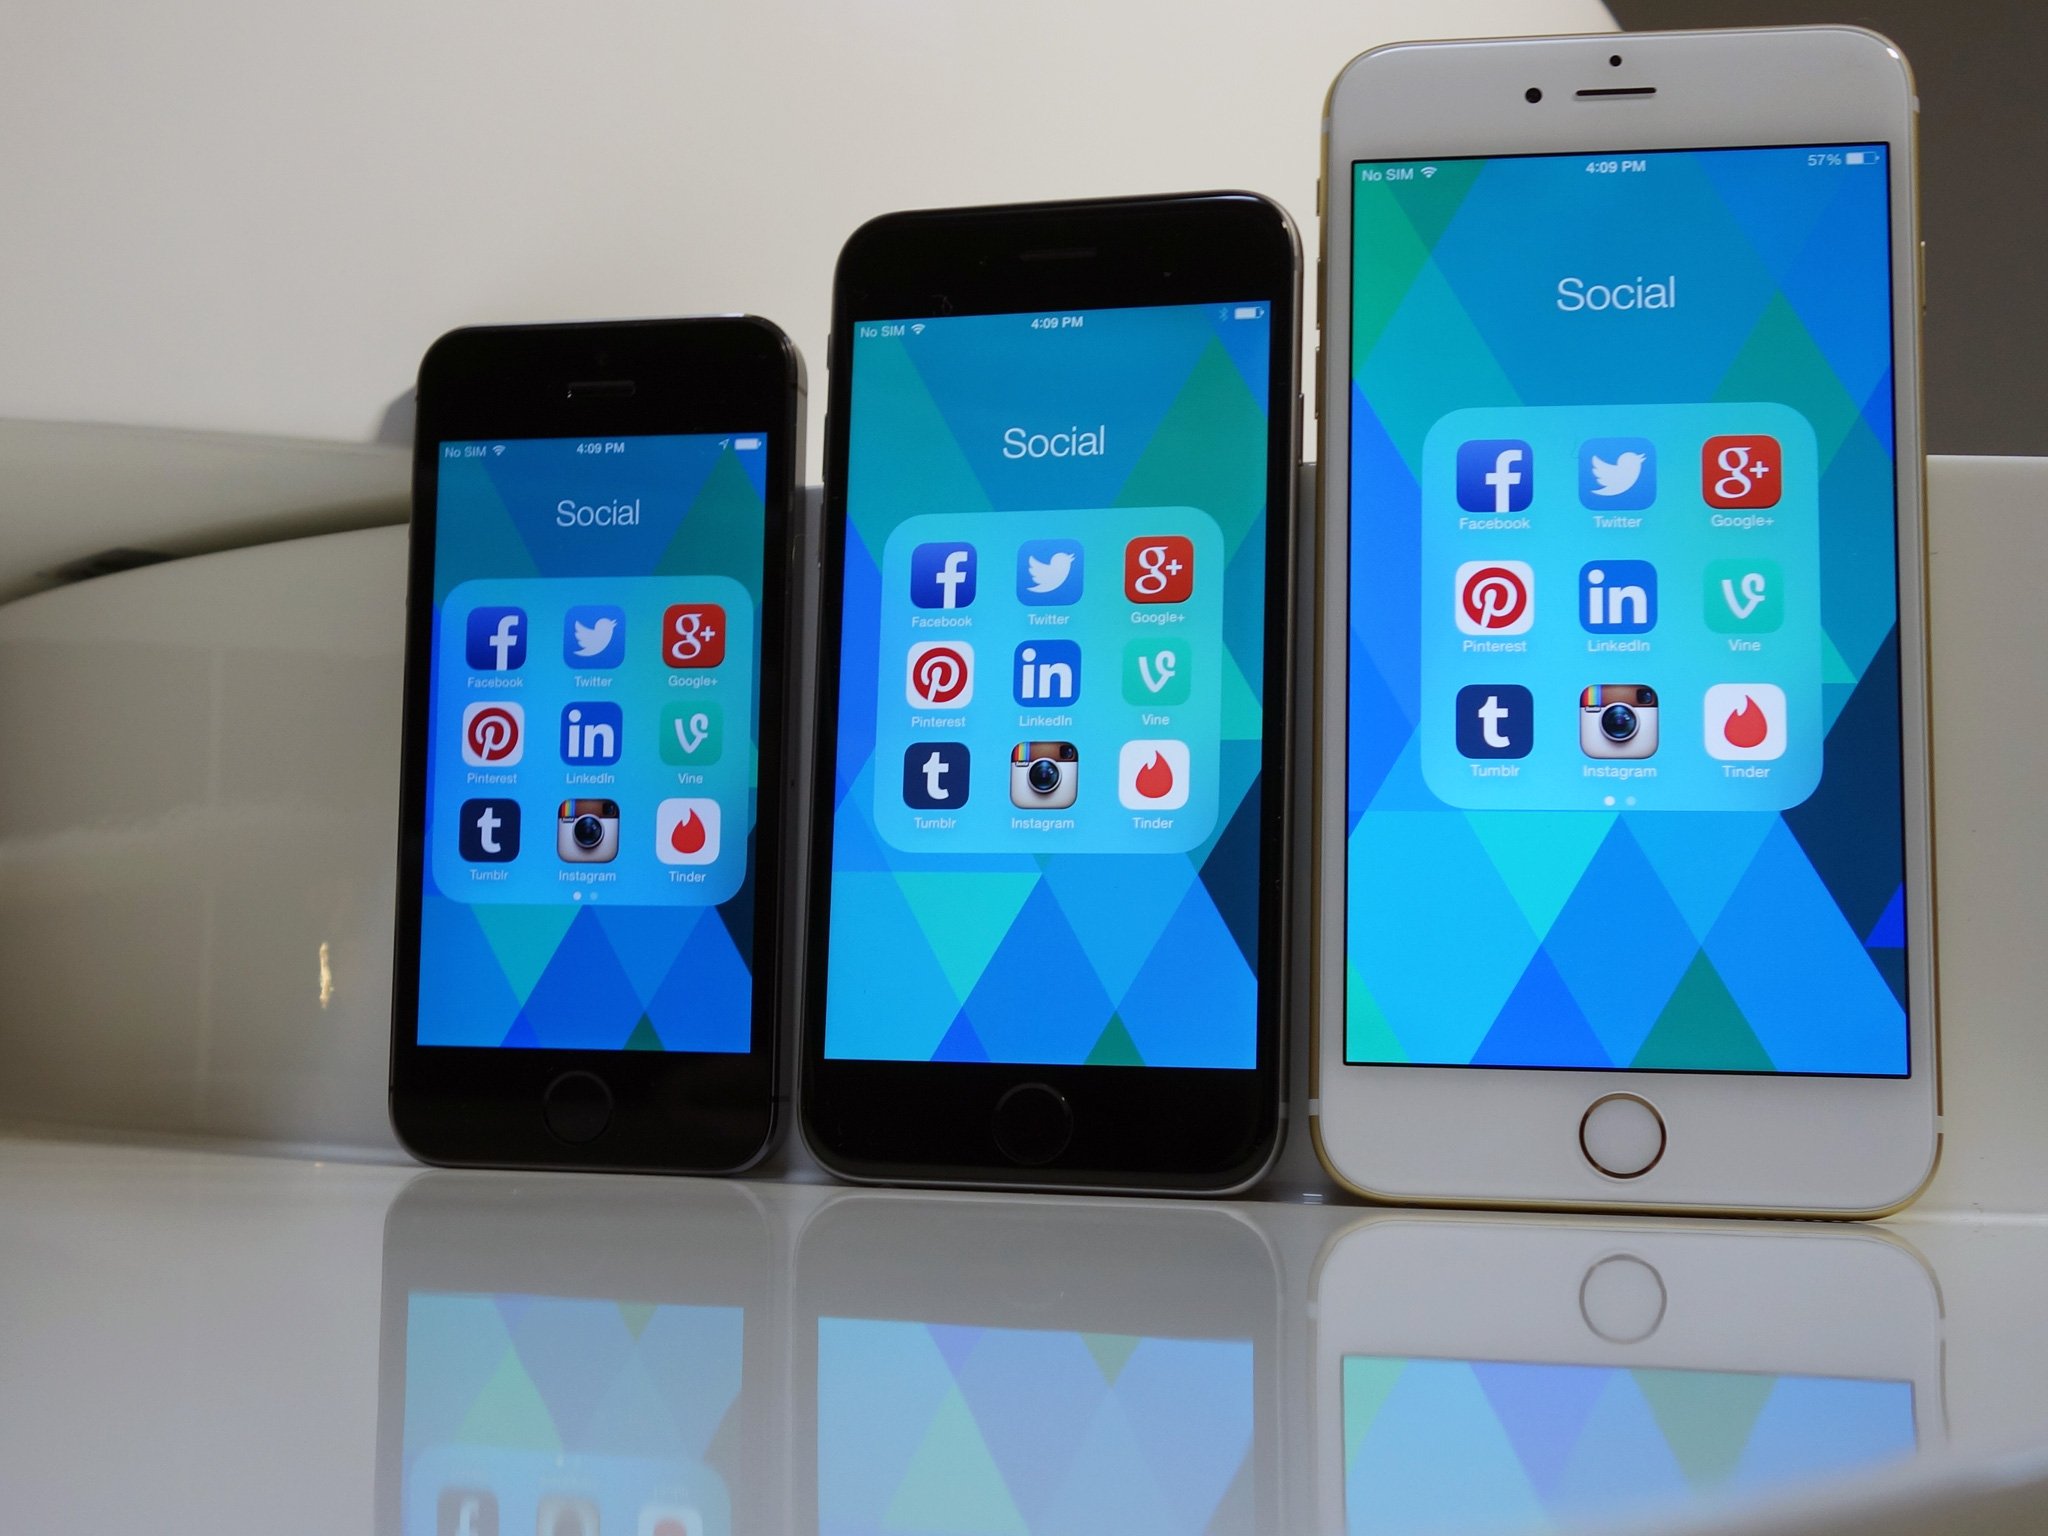 Folders on the iPhone 5S, 6 and 6 Plus